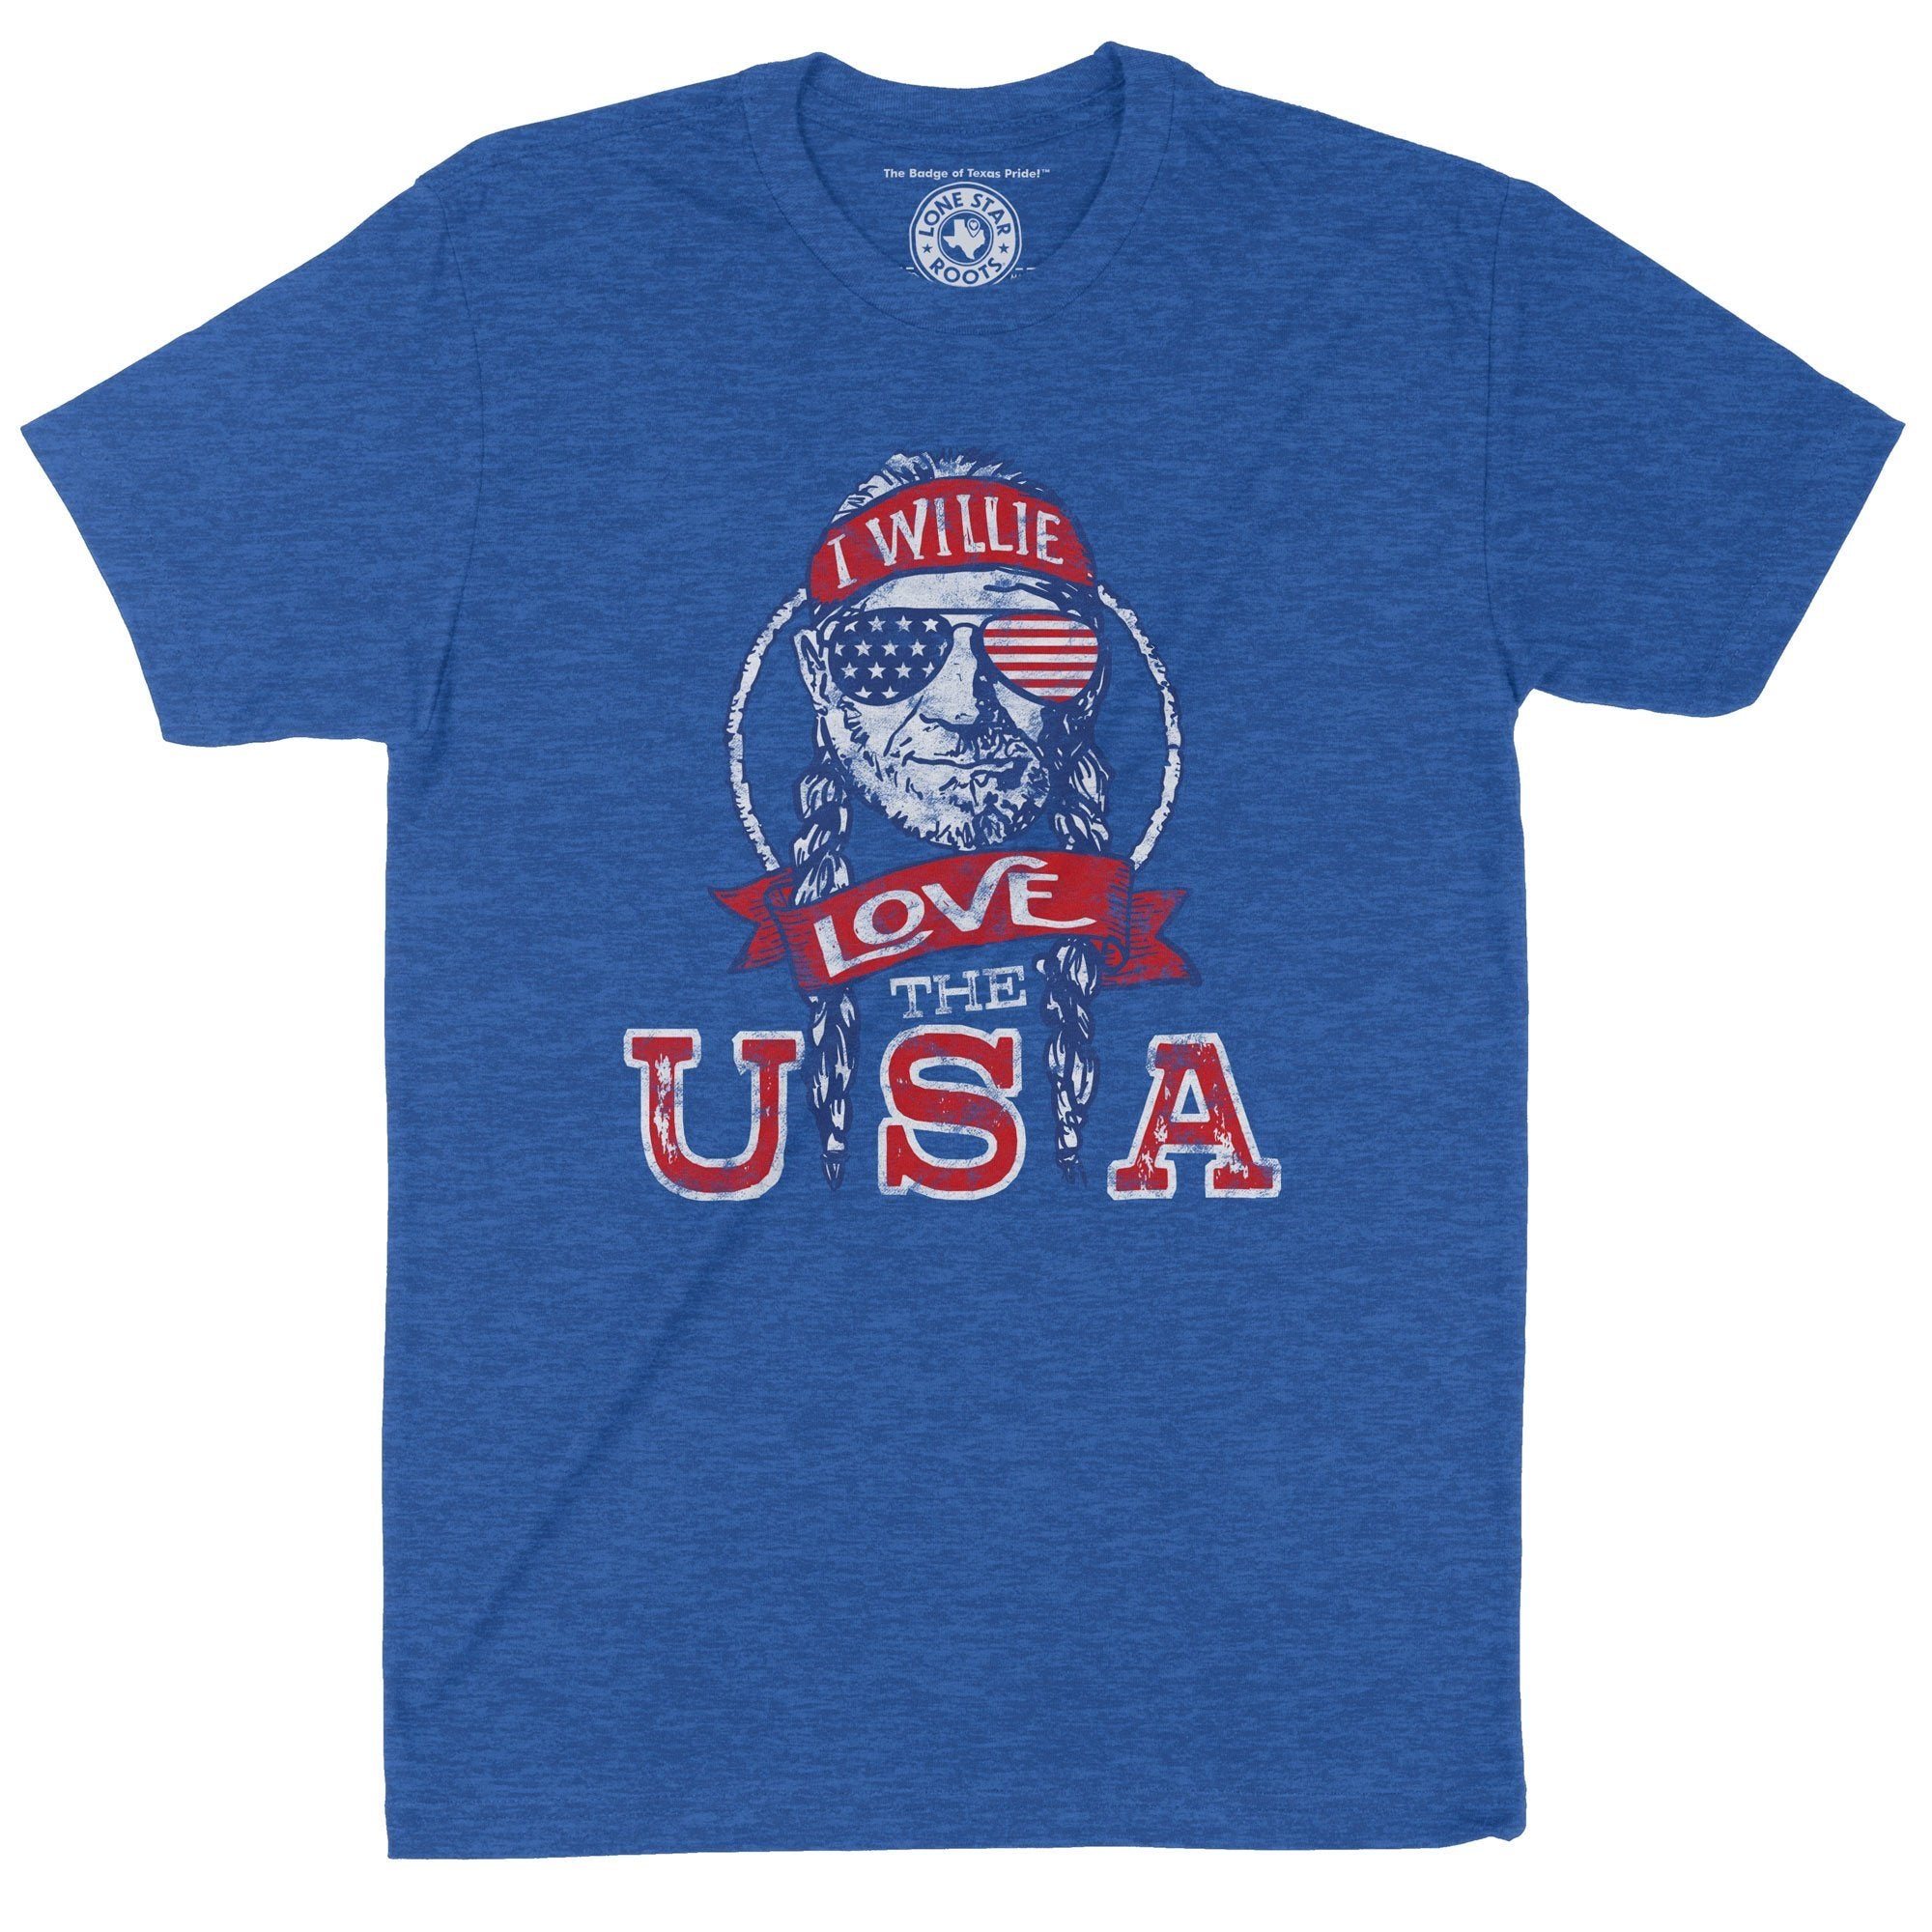 Lone Star Roots I Willie Love The USA Shirts 